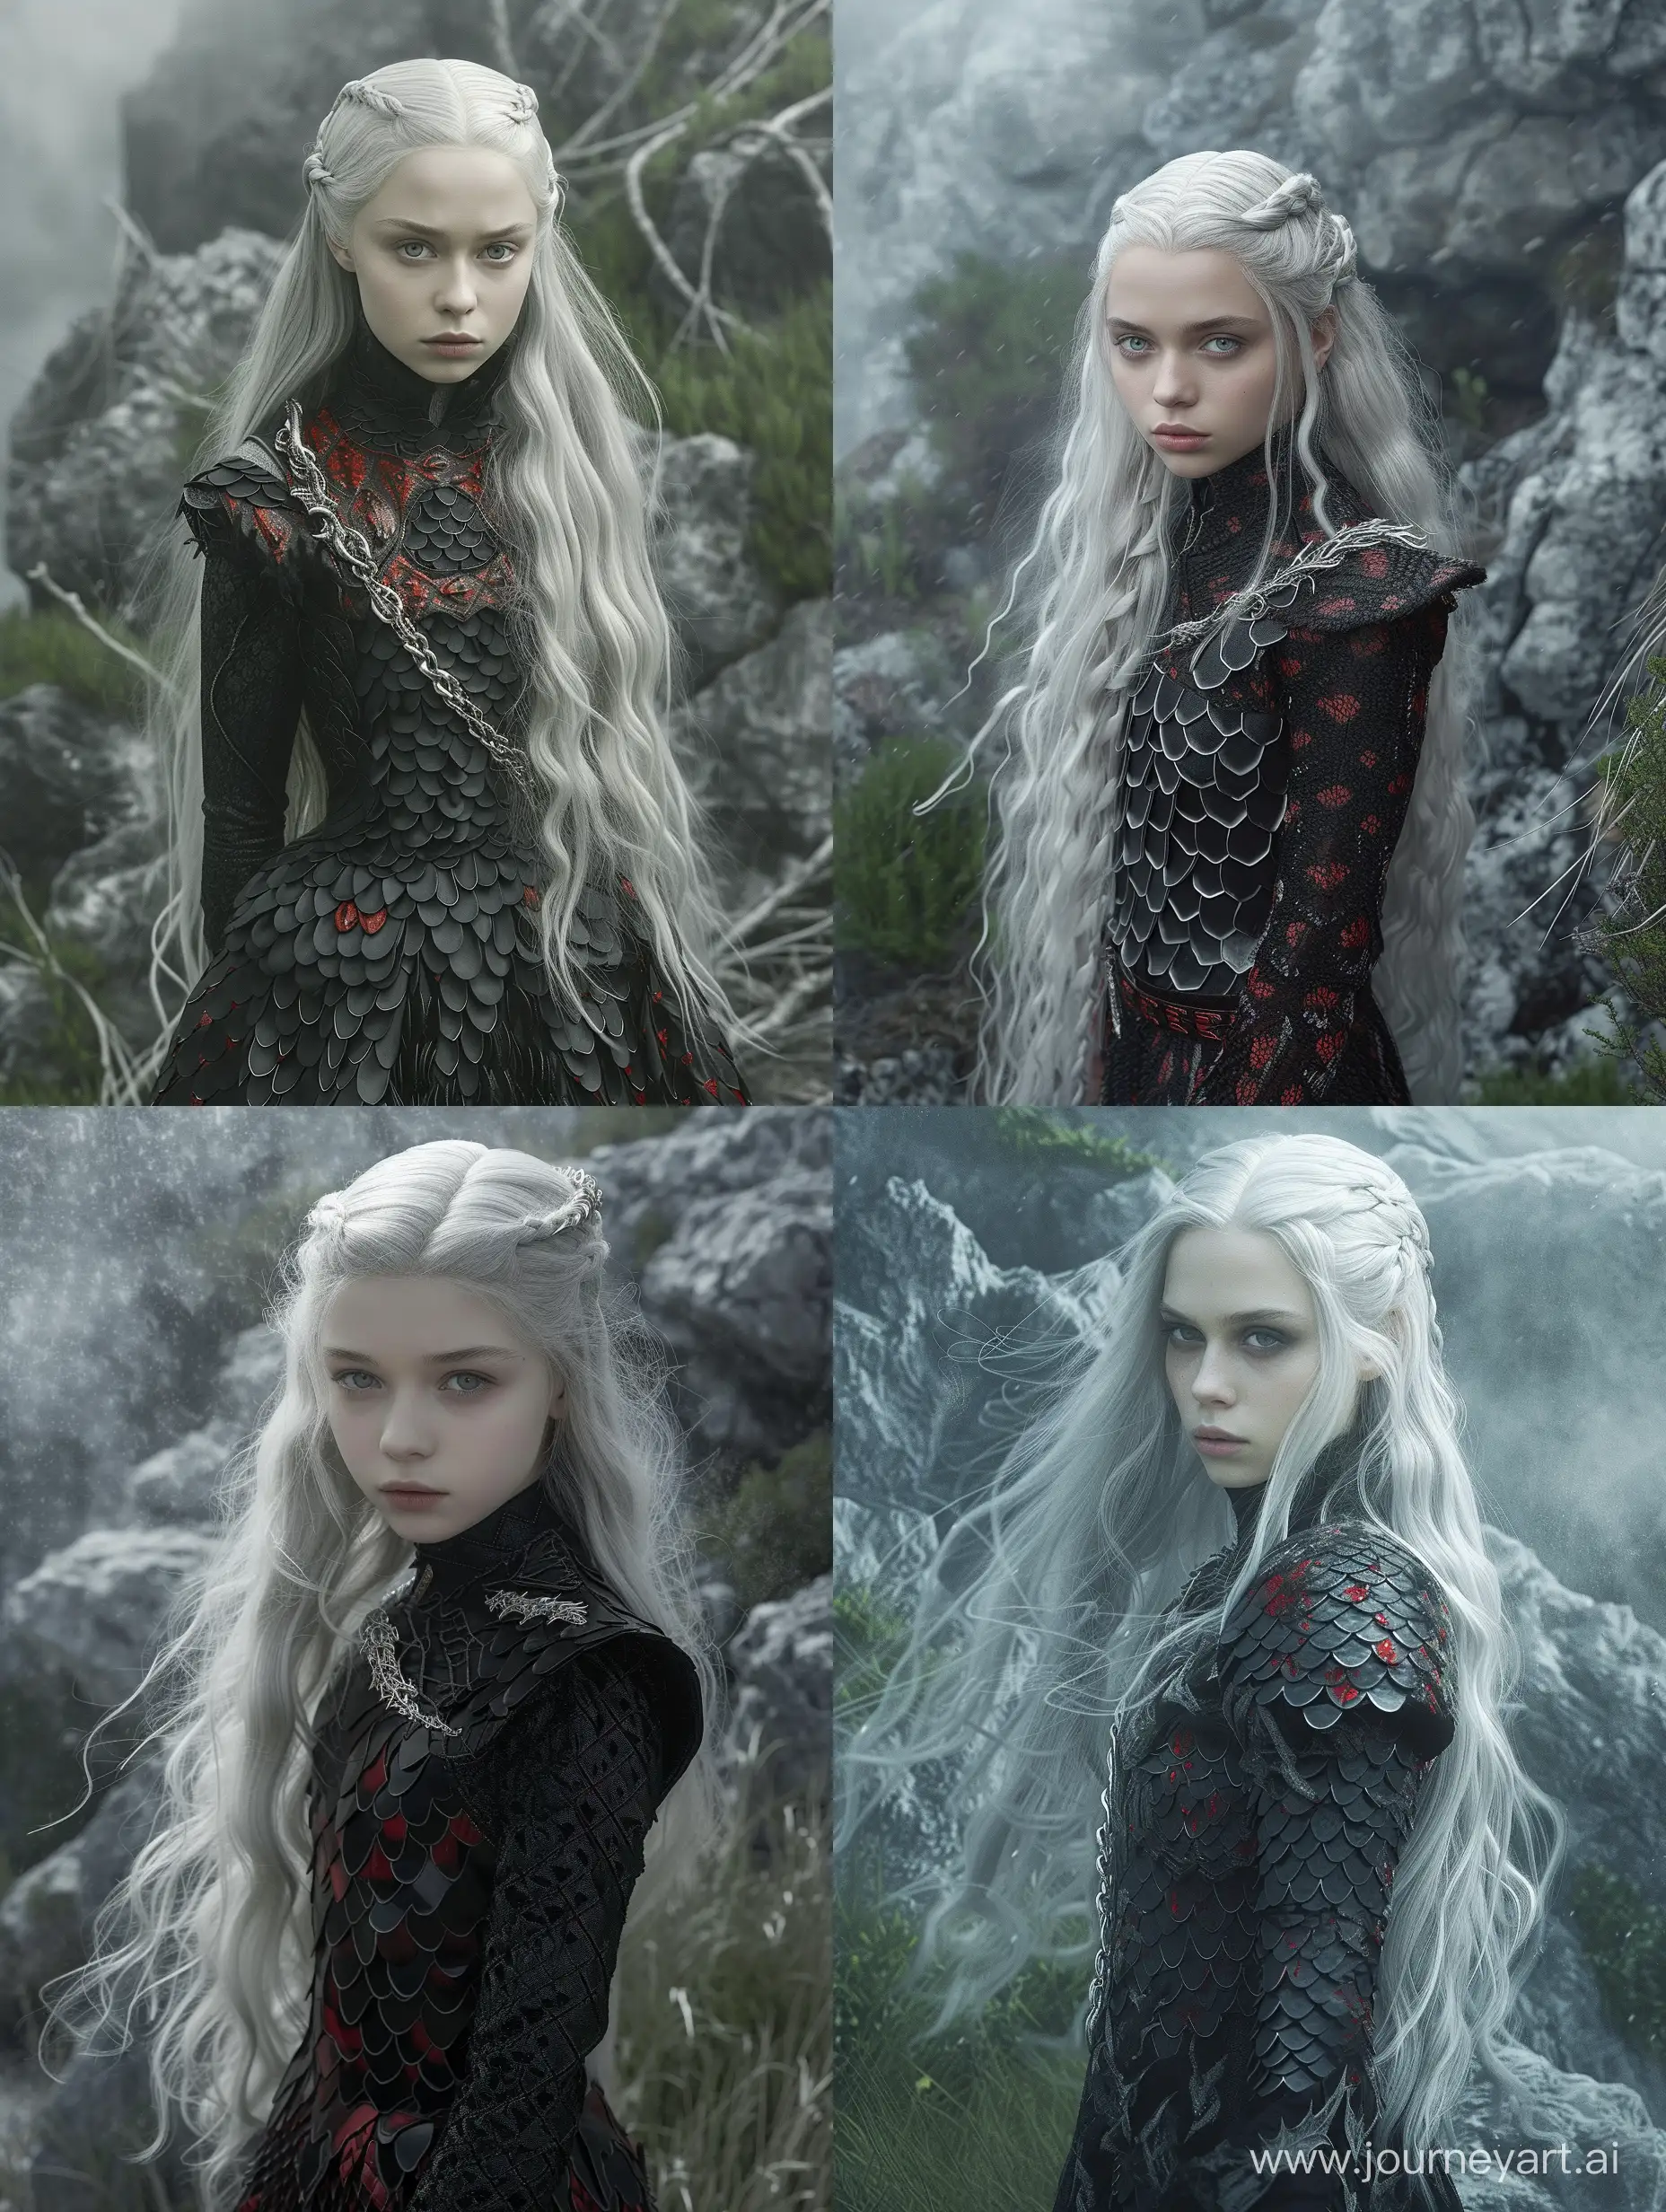 Actress Mia Goth is a Targaryen girl, she has long snow-white hair and gray eyes, dressed in a black dragon scale dress with red and silver patterns, against a background of gray rocks with green vegetation and grass, shrouded in fog, gray light and gloomy style